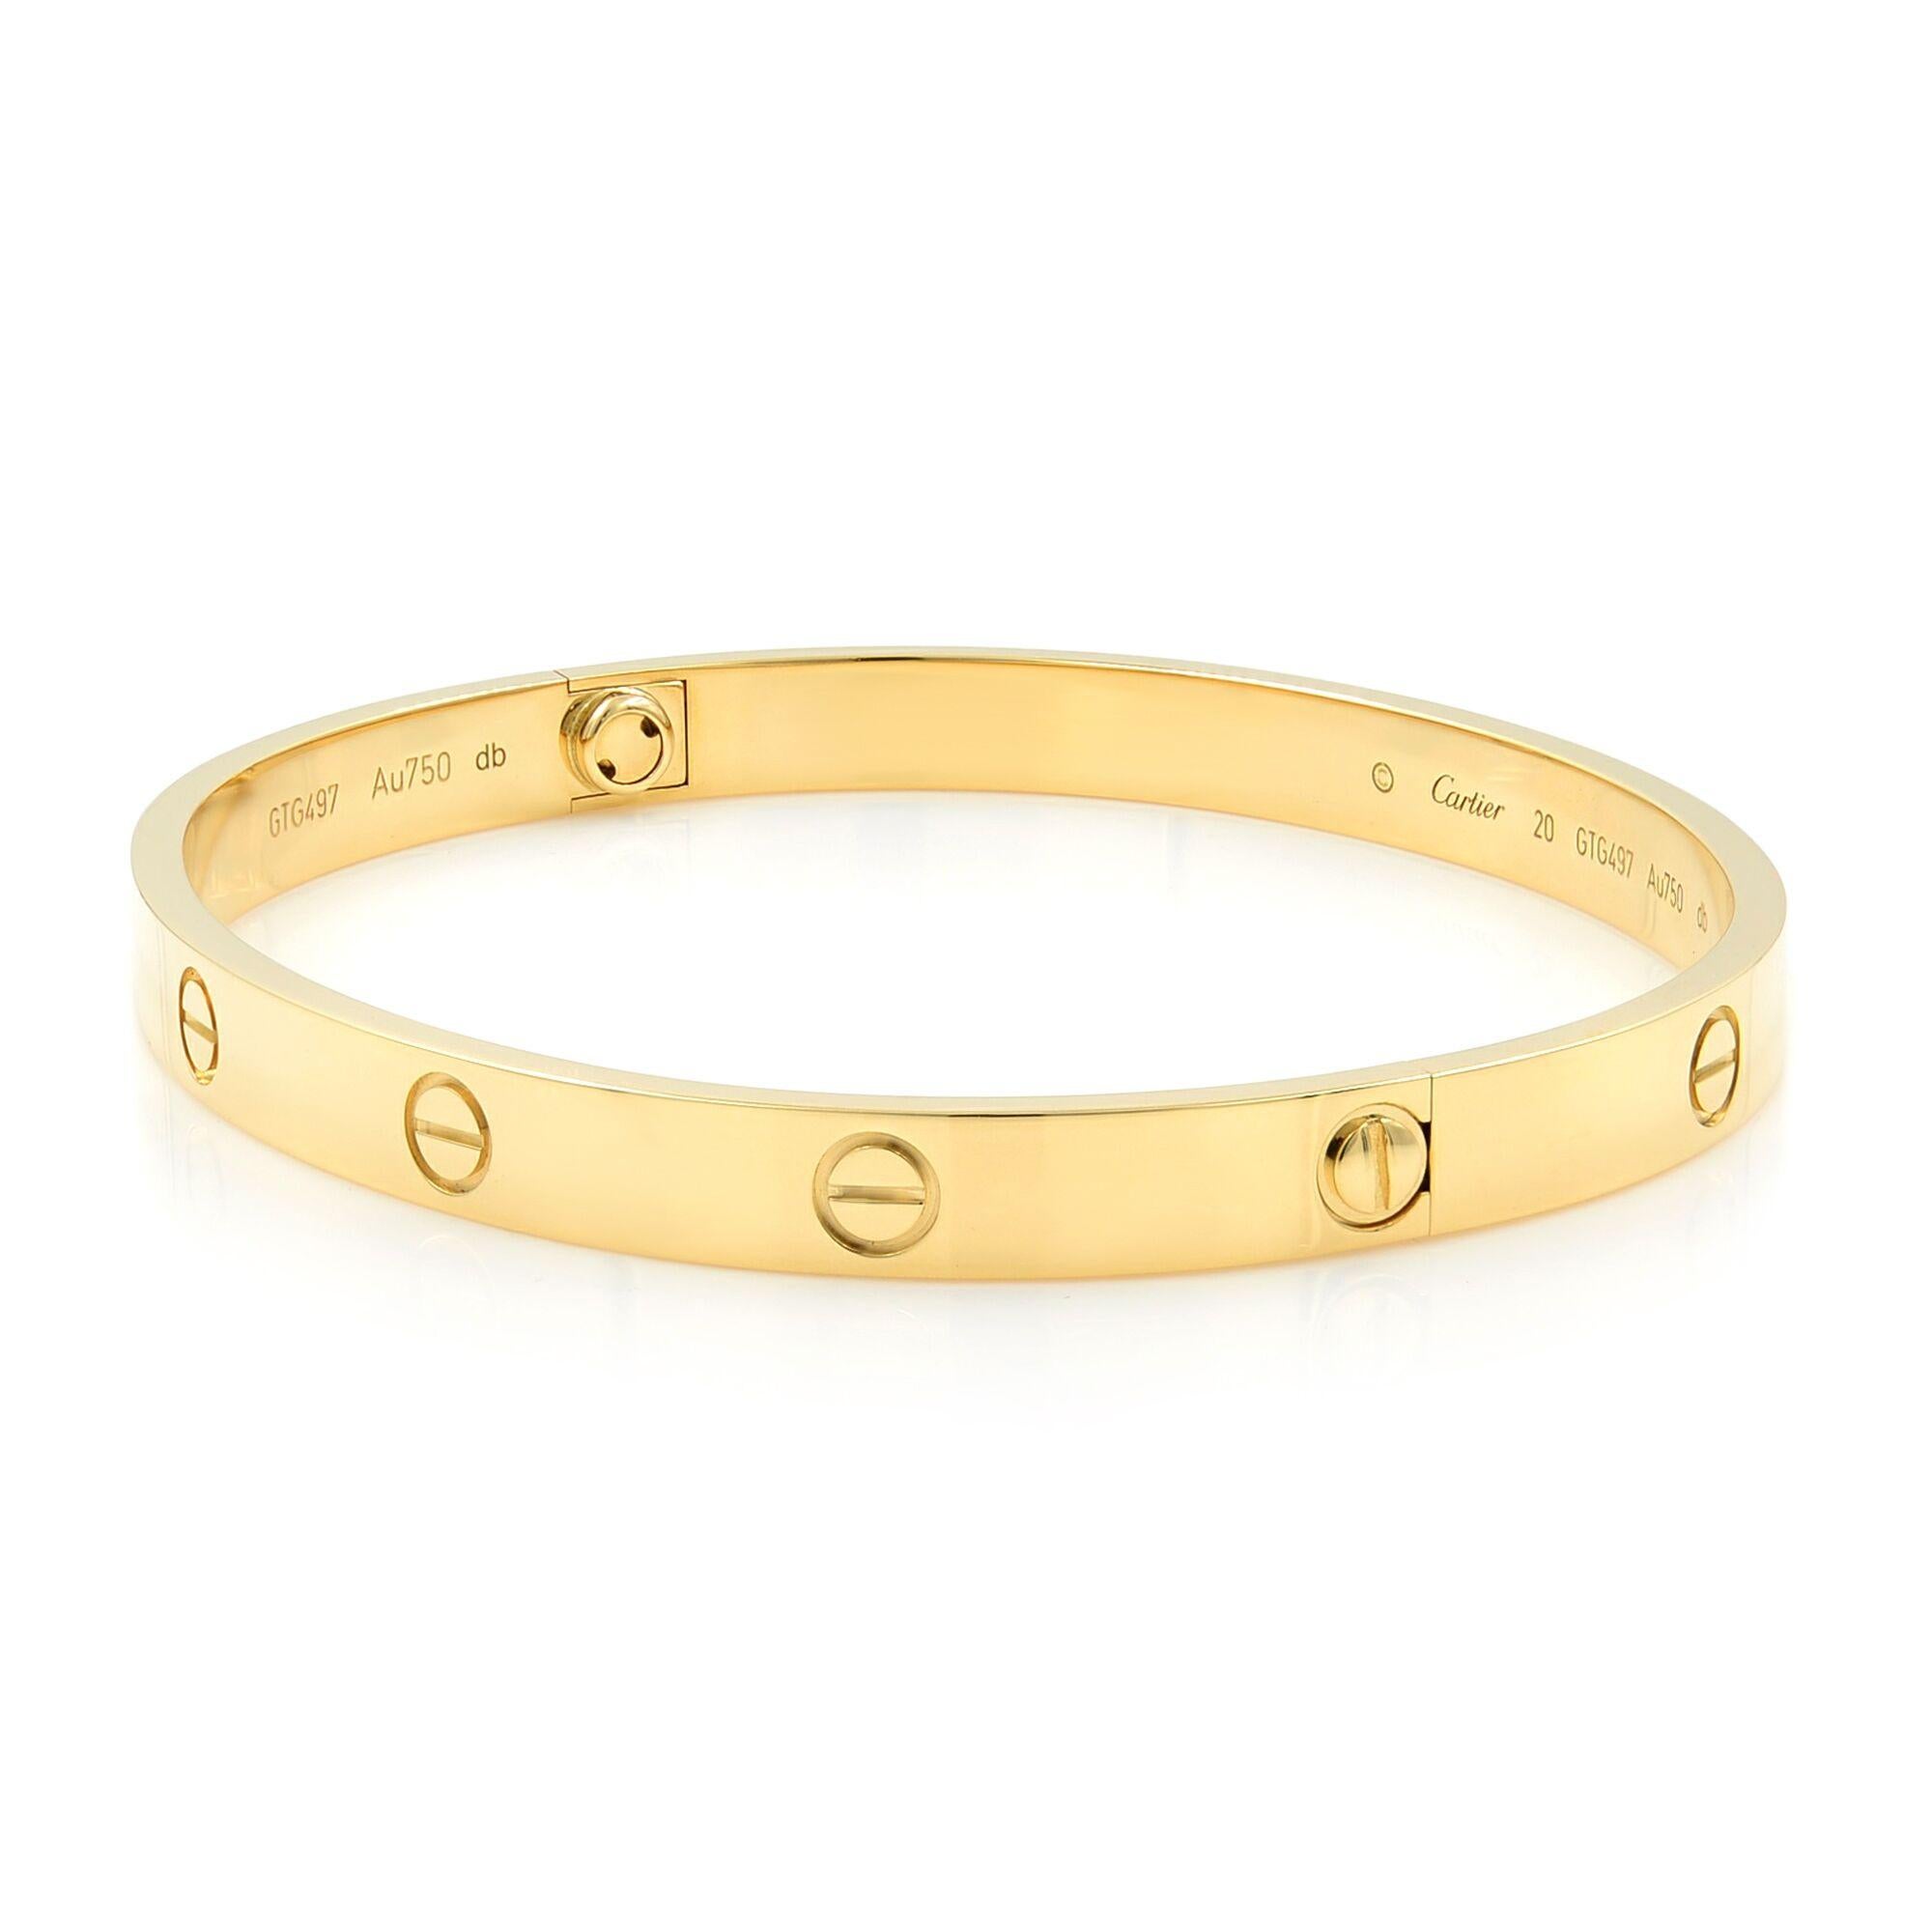 Cartier Love Bracelet Size 20 18K Yellow Gold.
Authentic and beautiful with no signs of wear this bangle is a statement of luxury and class.
Comes with screwdriver, box and papers.
The bracelet is marked 